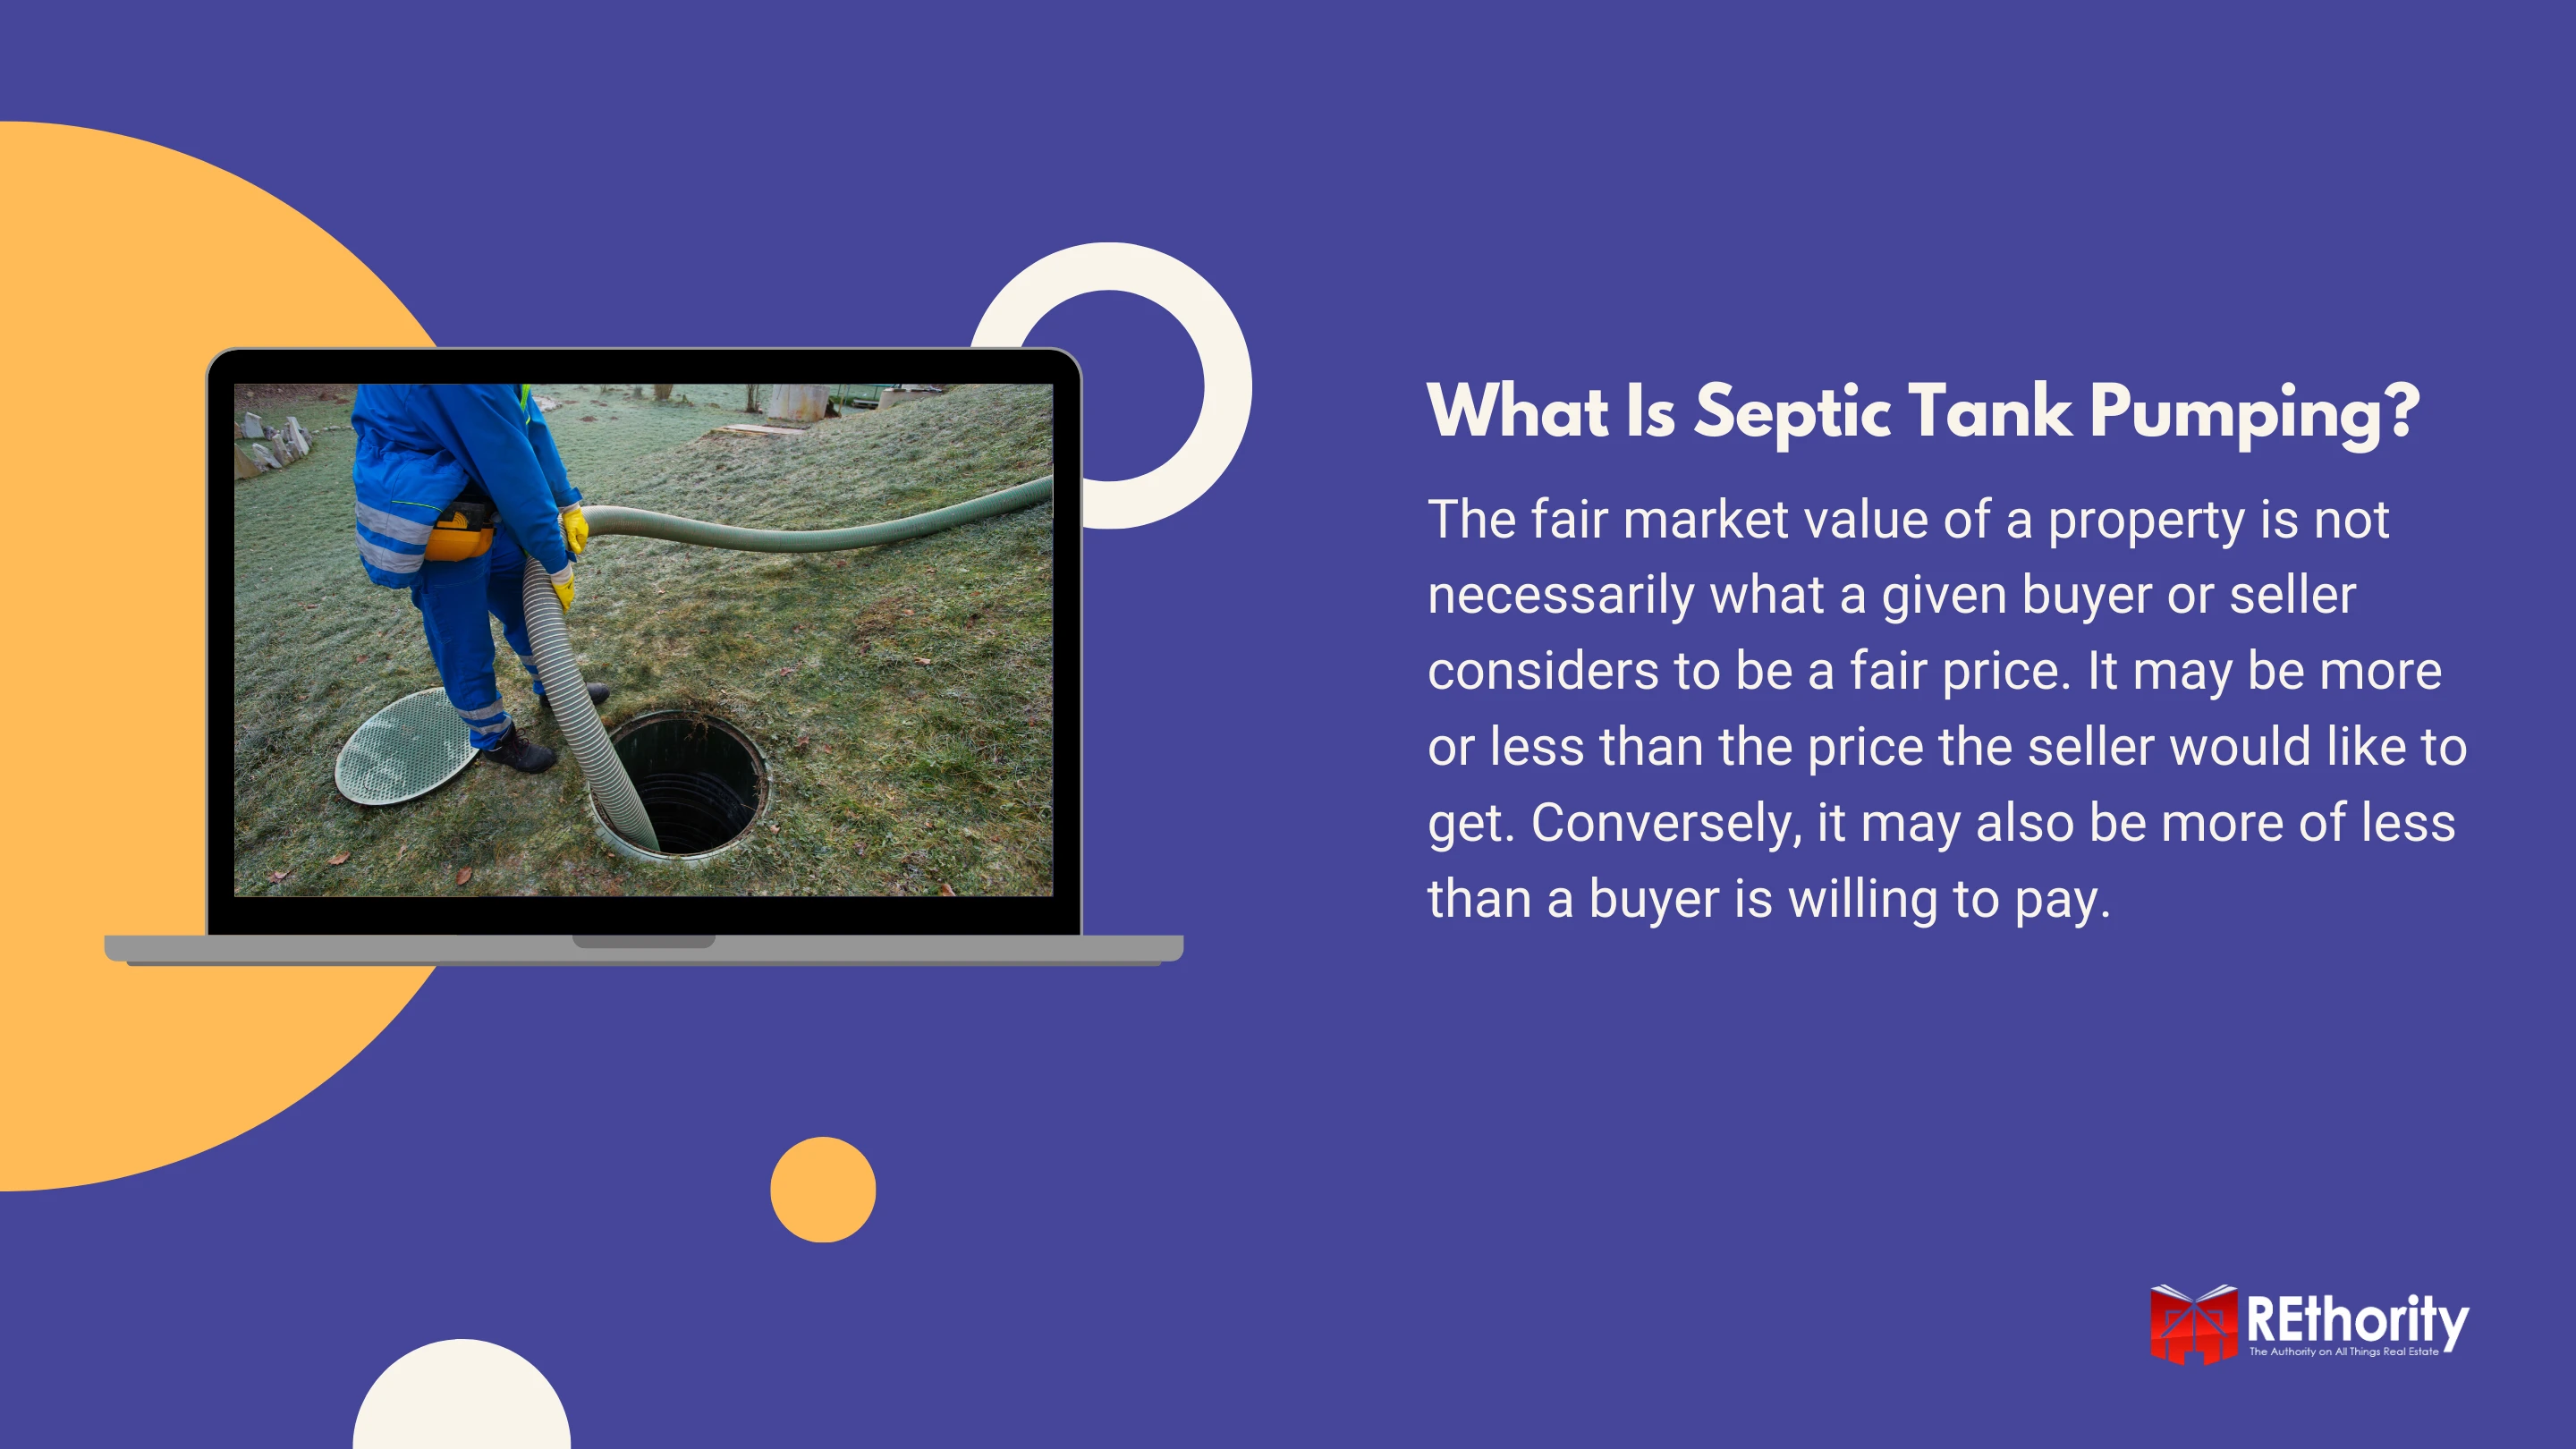 What Is Septic Tank Pumping graphic against blue background